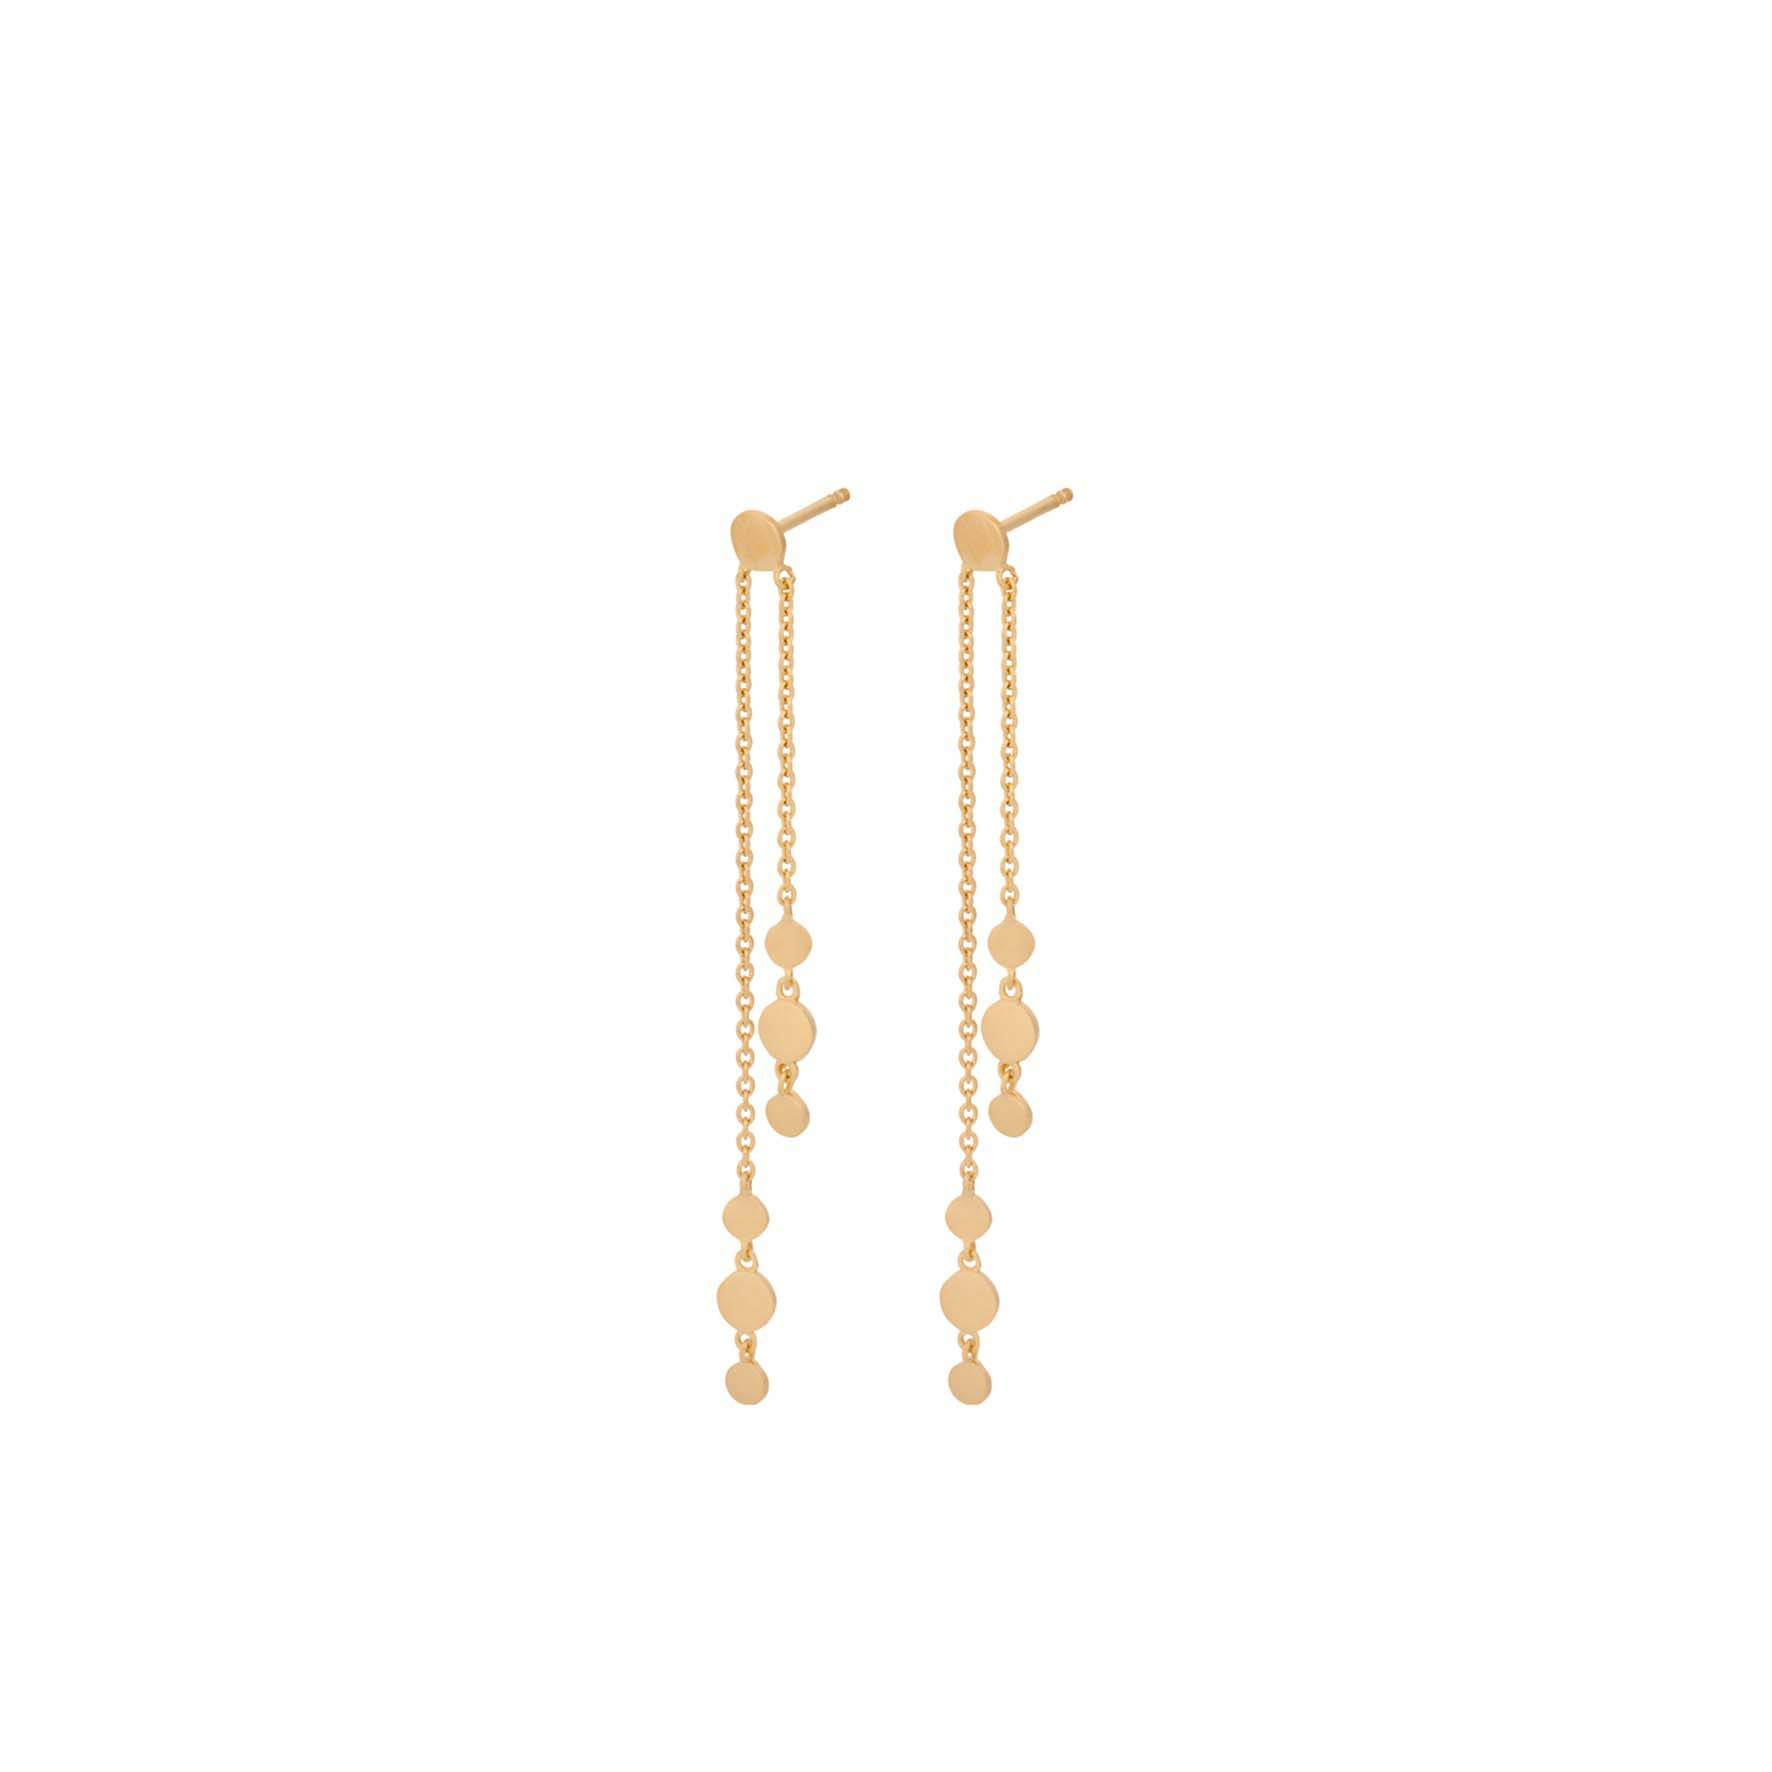 Flow Earchains from Pernille Corydon in Goldplated-Silver Sterling 925